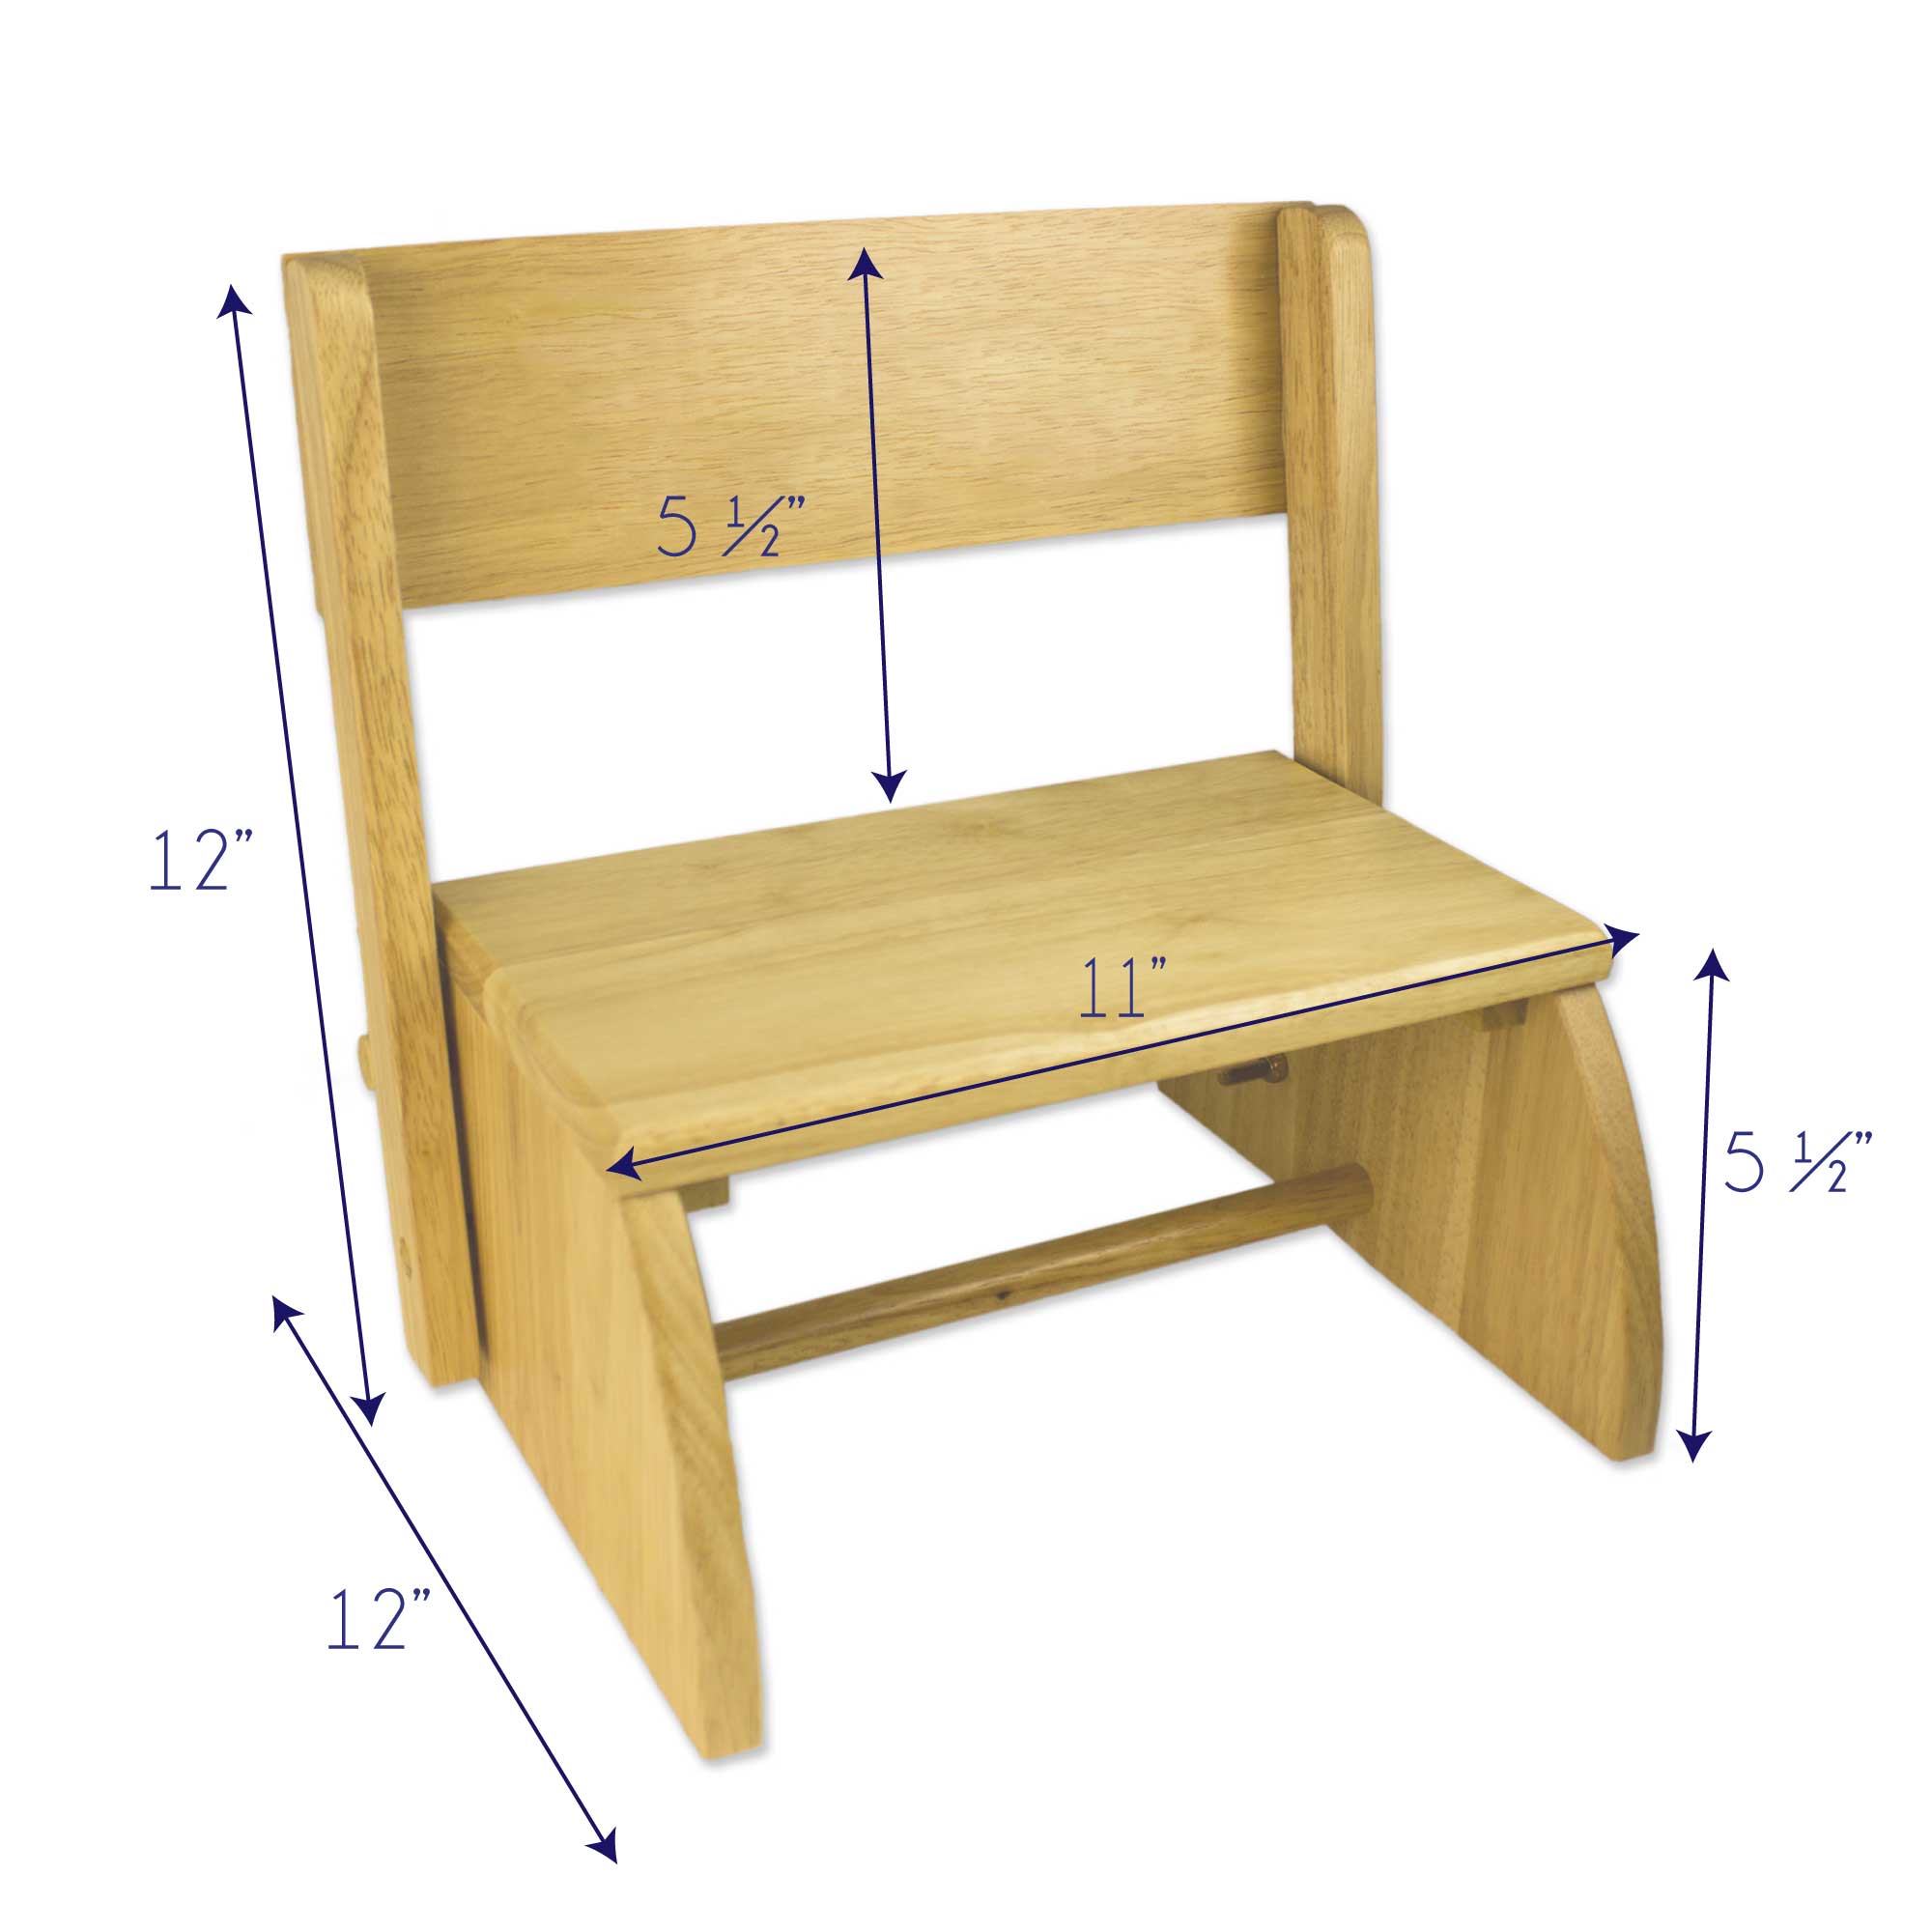 Child's Chair/Step Stool Pattern